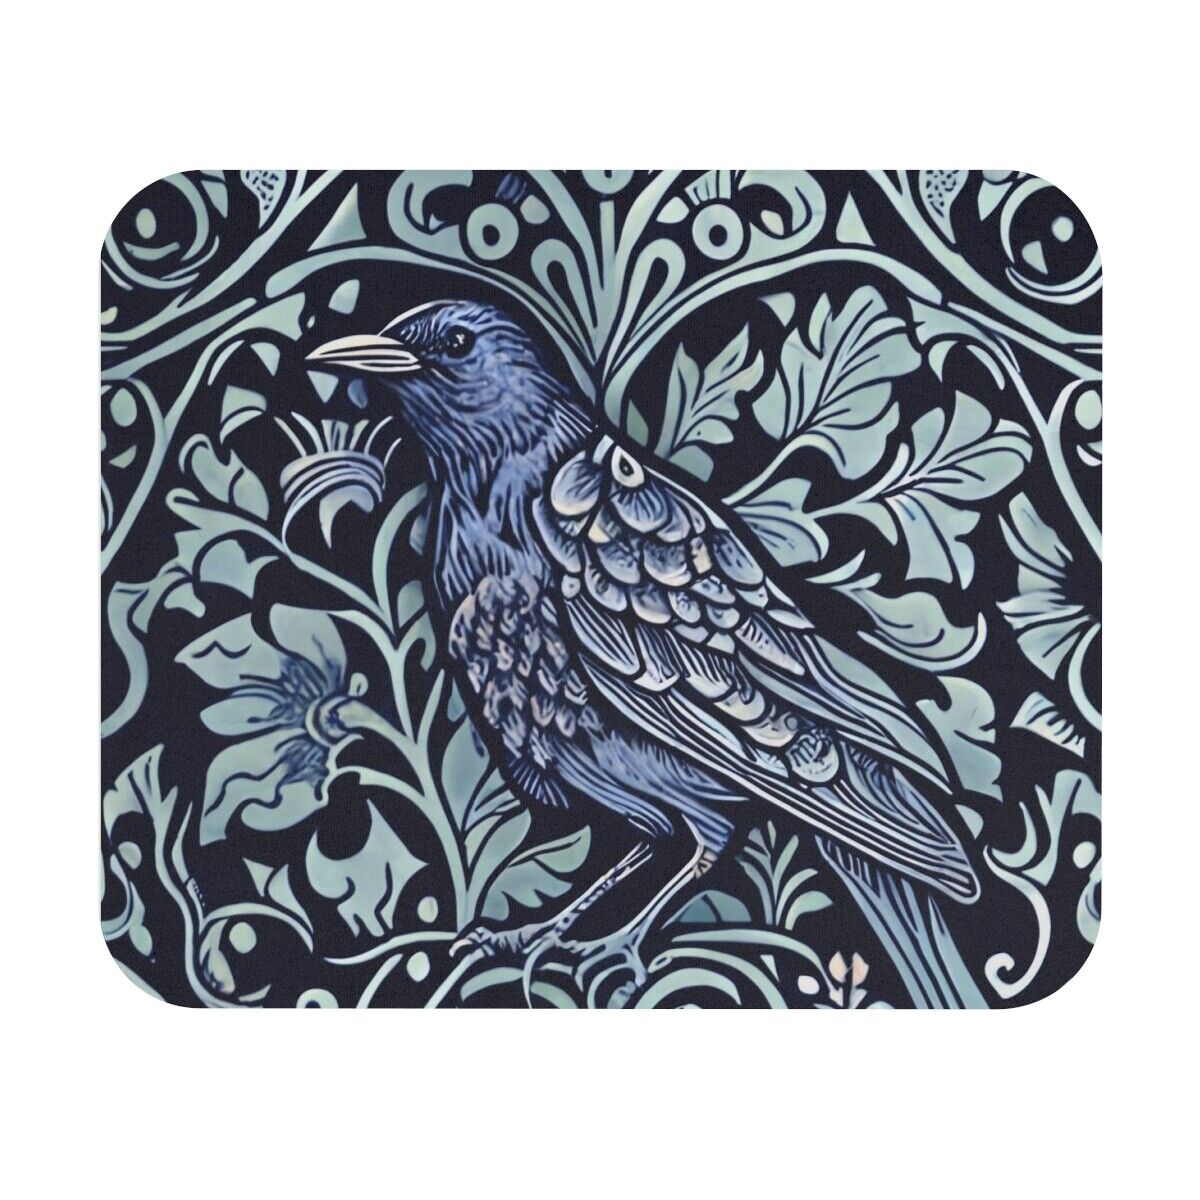 Edgar Allan Poe Raven mouse pad / Blue Forestcore William Morris crow gamer gift